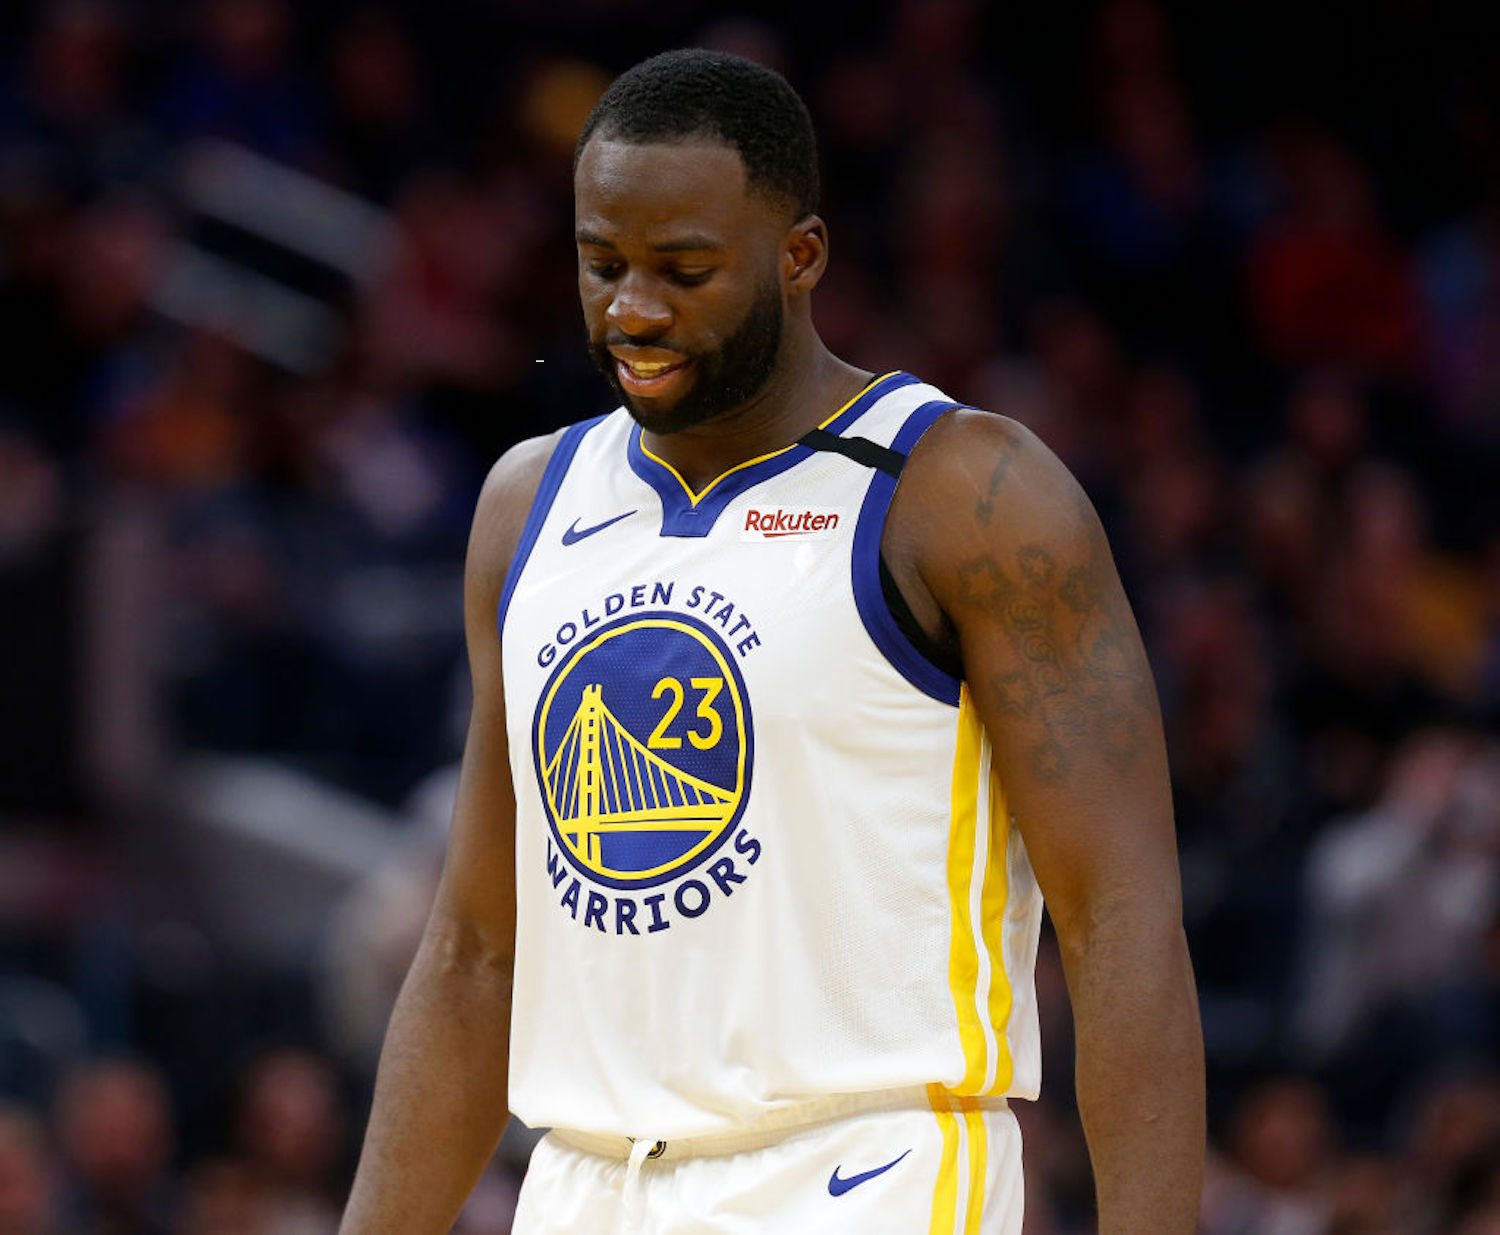 The Warriors begin their 2020-21 season in just two weeks, but they were just hit with two COVID-19 blows at the worst time.